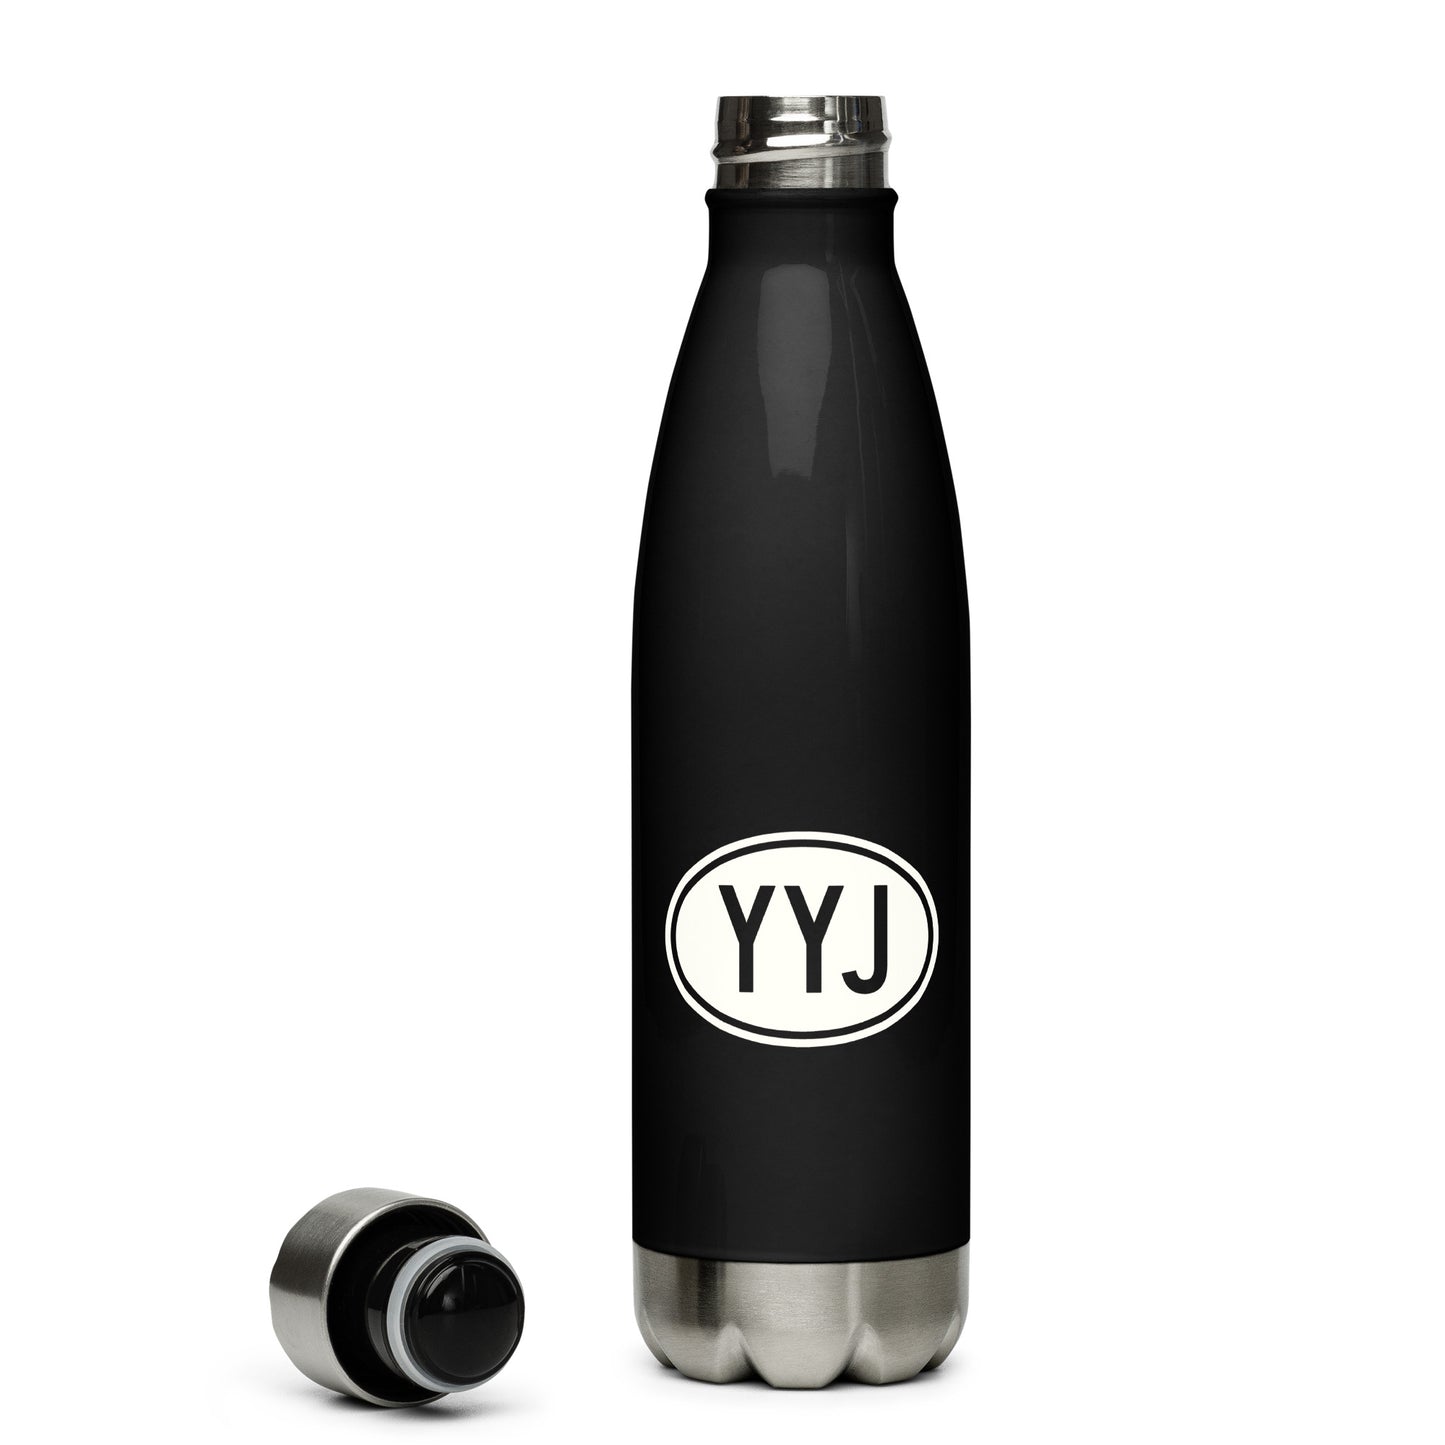 Unique Travel Gift Water Bottle - White Oval • YYJ Victoria • YHM Designs - Image 04